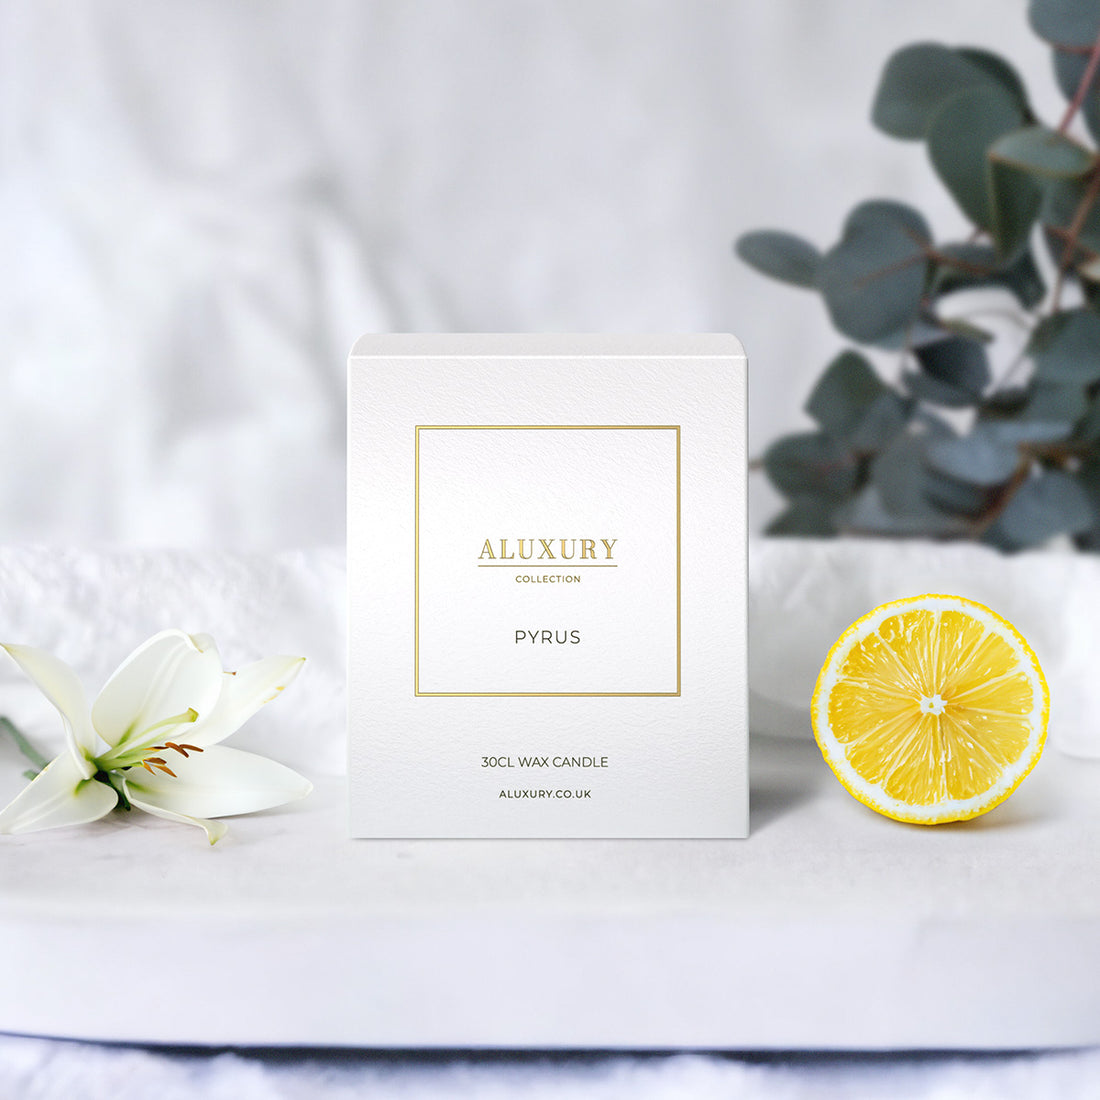 Pyrus 30cl candle box by ALUXURY